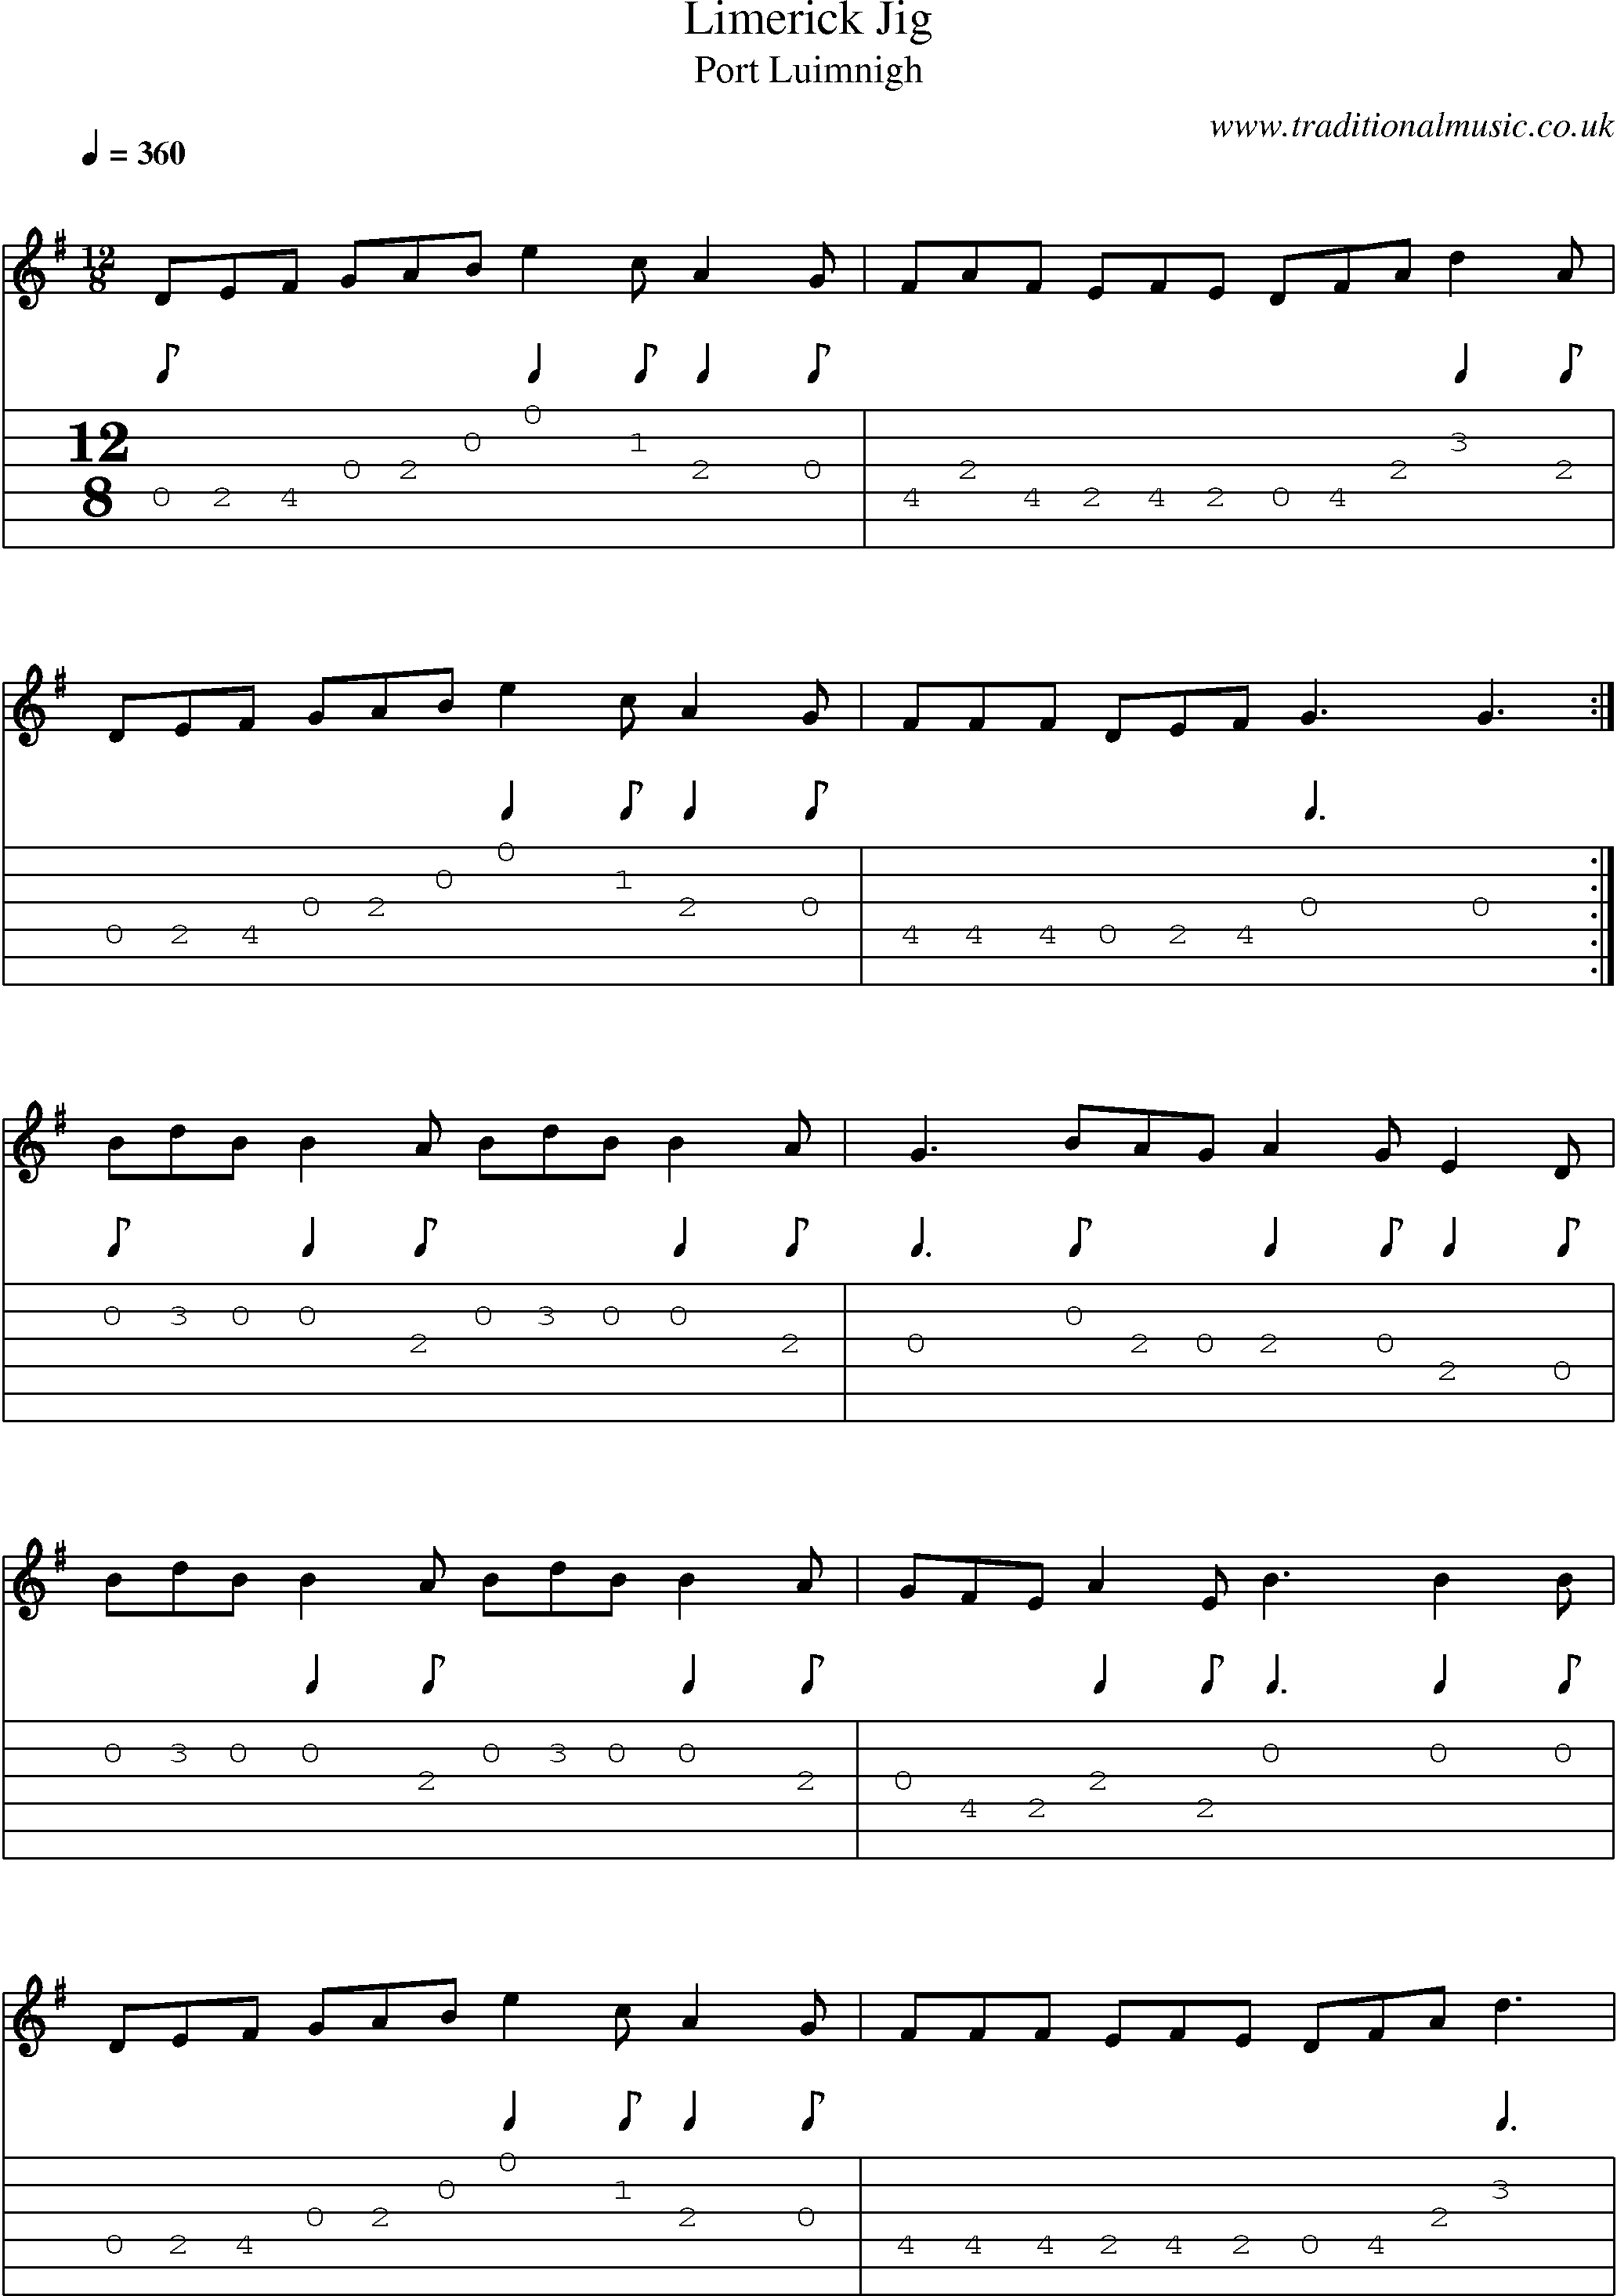 Music Score and Guitar Tabs for Limerick Jig